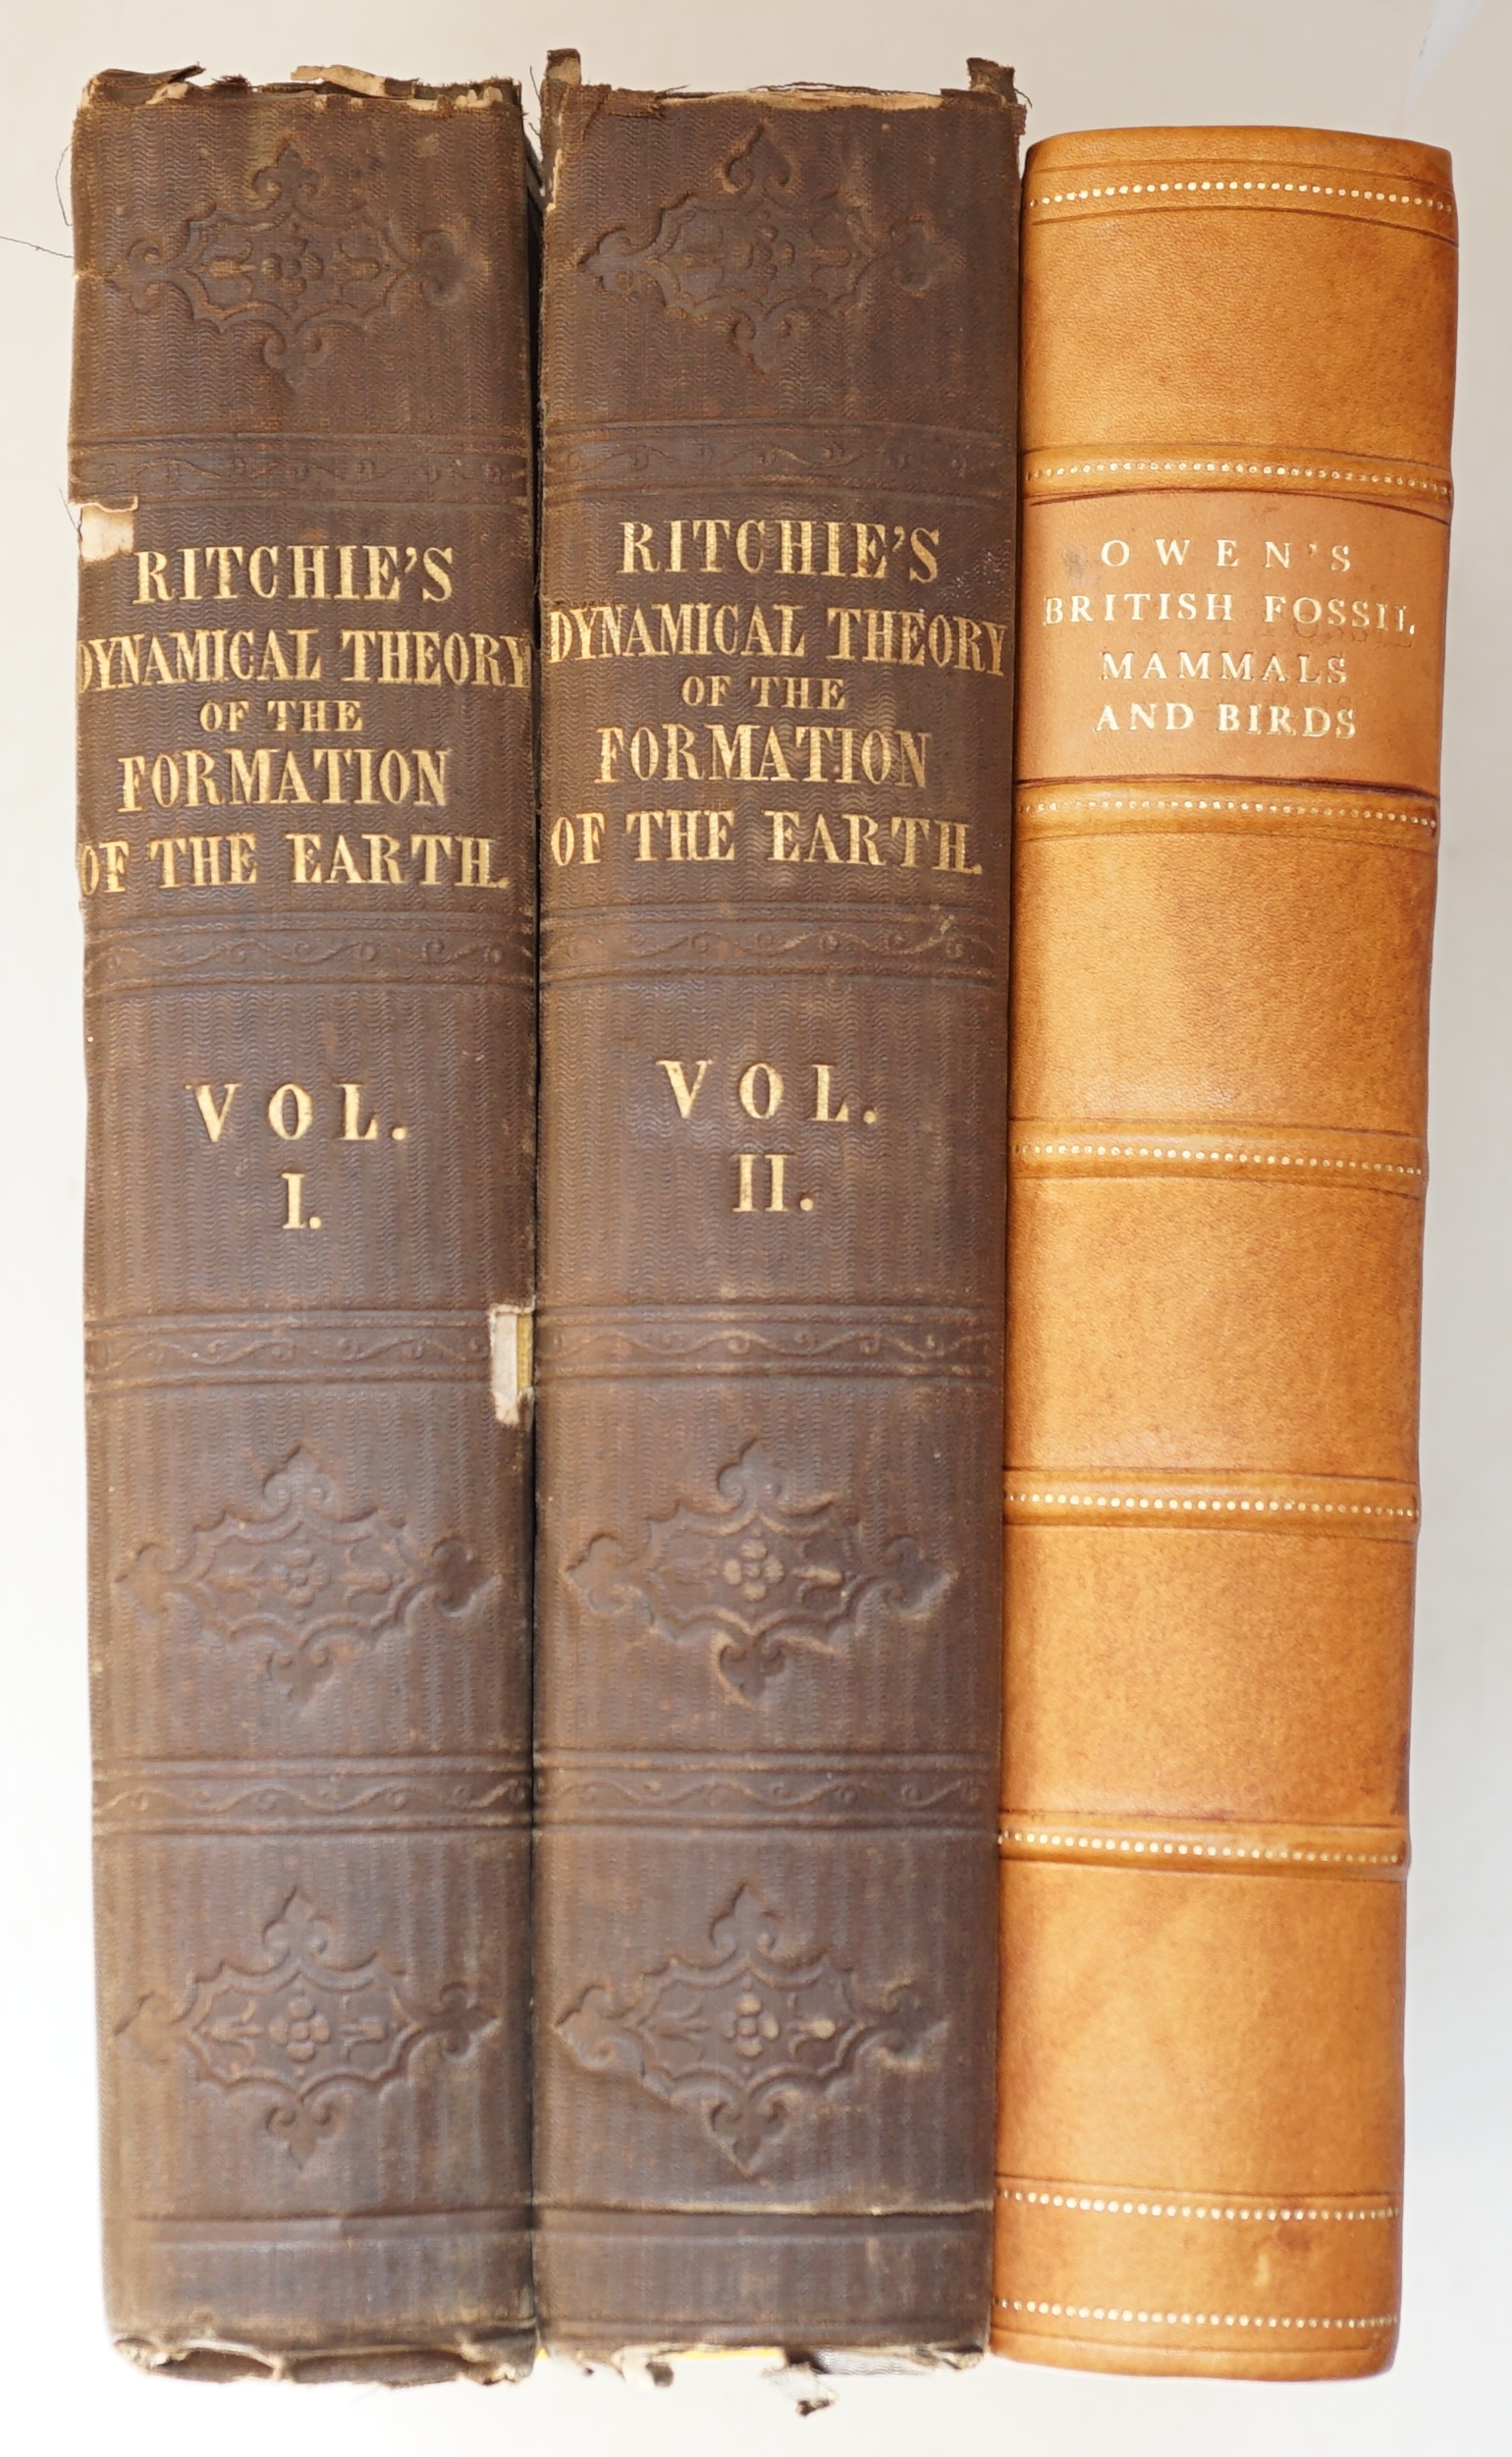 Owen, Richard - A History of British Fossil Mammals and Birds, 8vo, rebacked half calf, John Van Voorst, London, 1846 and Ritchie, Archibald Tucker - The Dynamical Theory of the Formation of the Earth, 2 vols, 8vo, blind